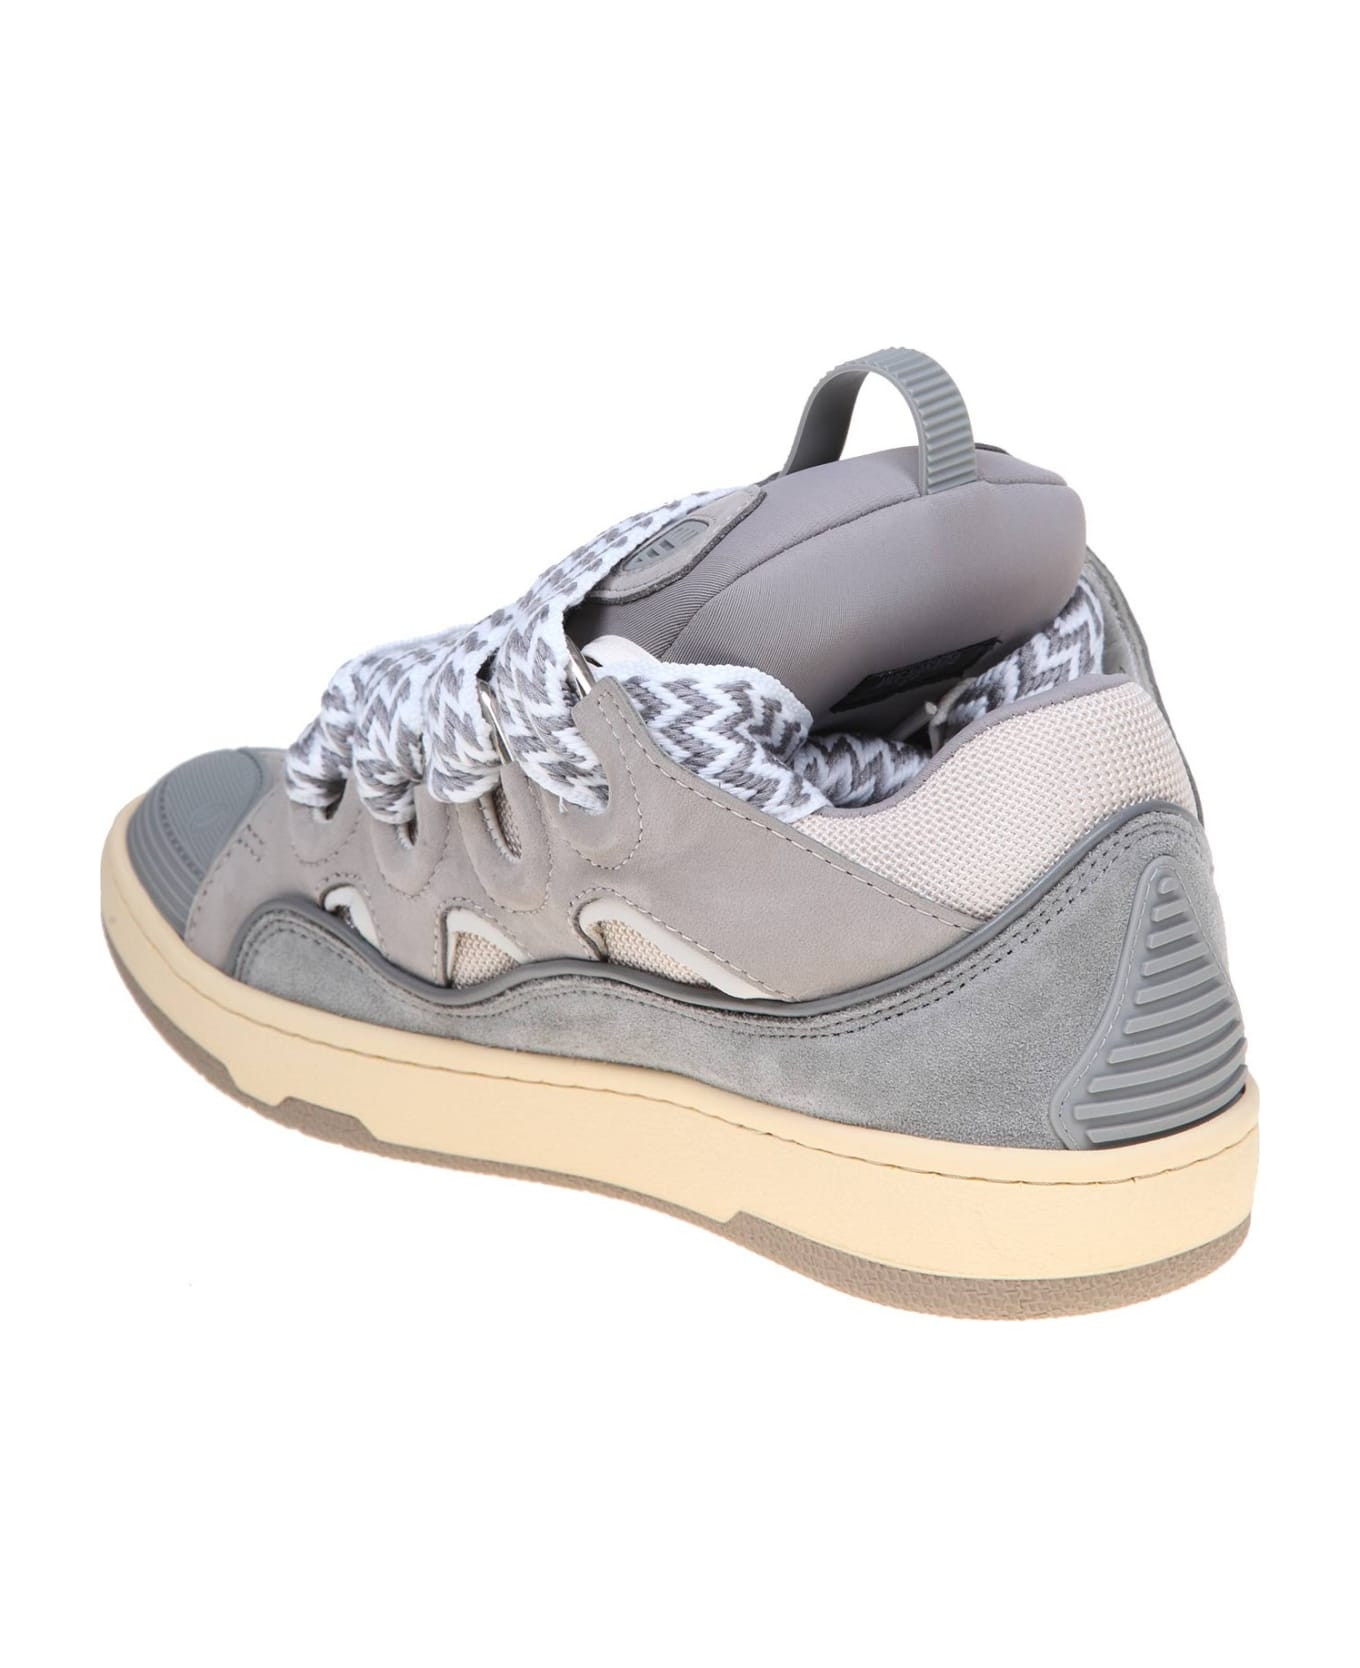 Lanvin Curb Sneakers In Suede And Gray Fabric - GREY スニーカー